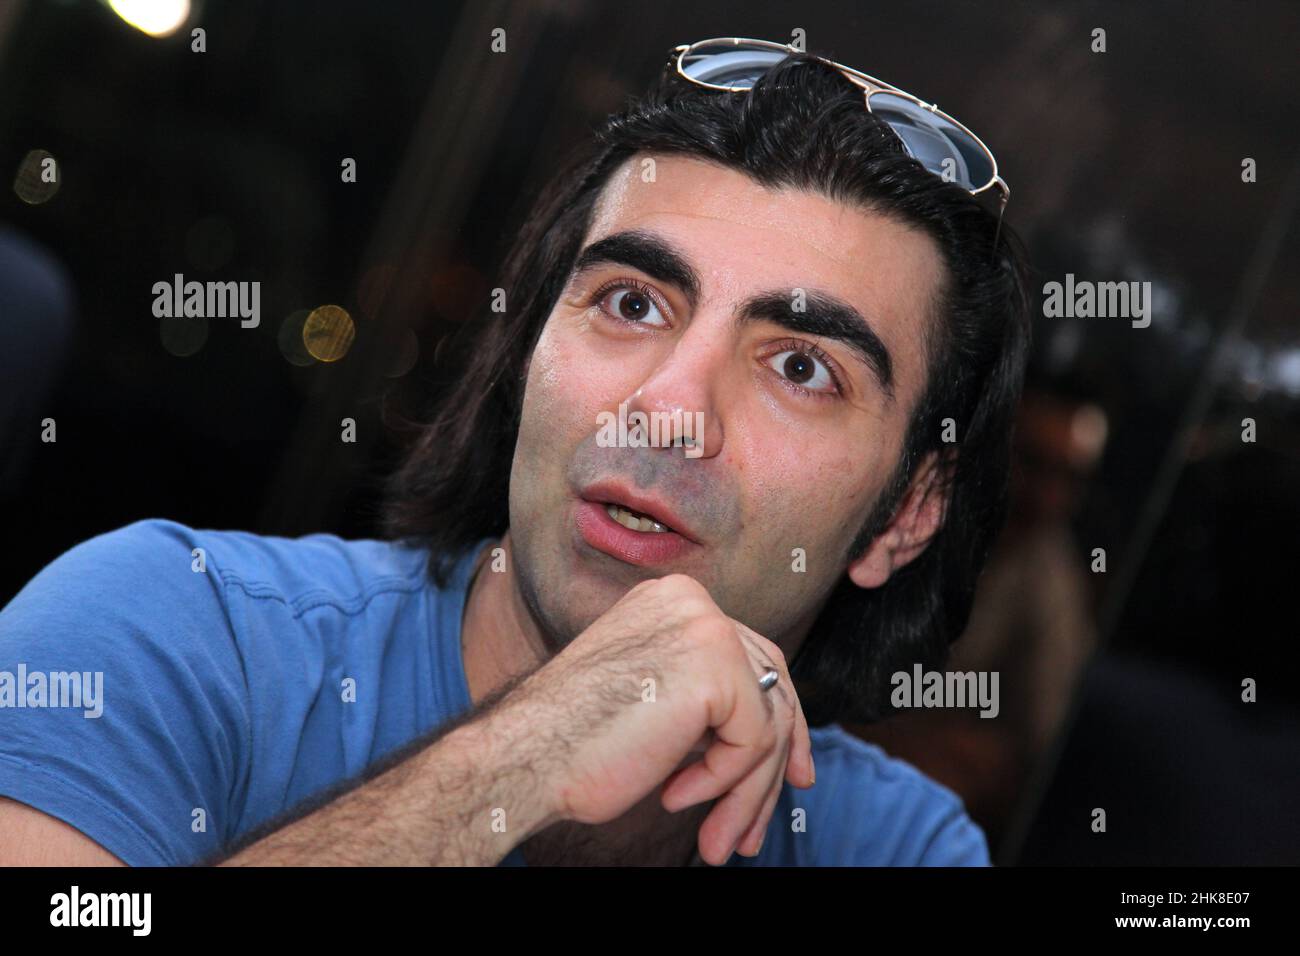 ISTANBUL, TURKEY - SEPTEMBER 14: Famous Turkish-German film director, screenwriter and producer Fatih Akin portrait on September 14, 2012 in Istanbul, Turkey. Stock Photo